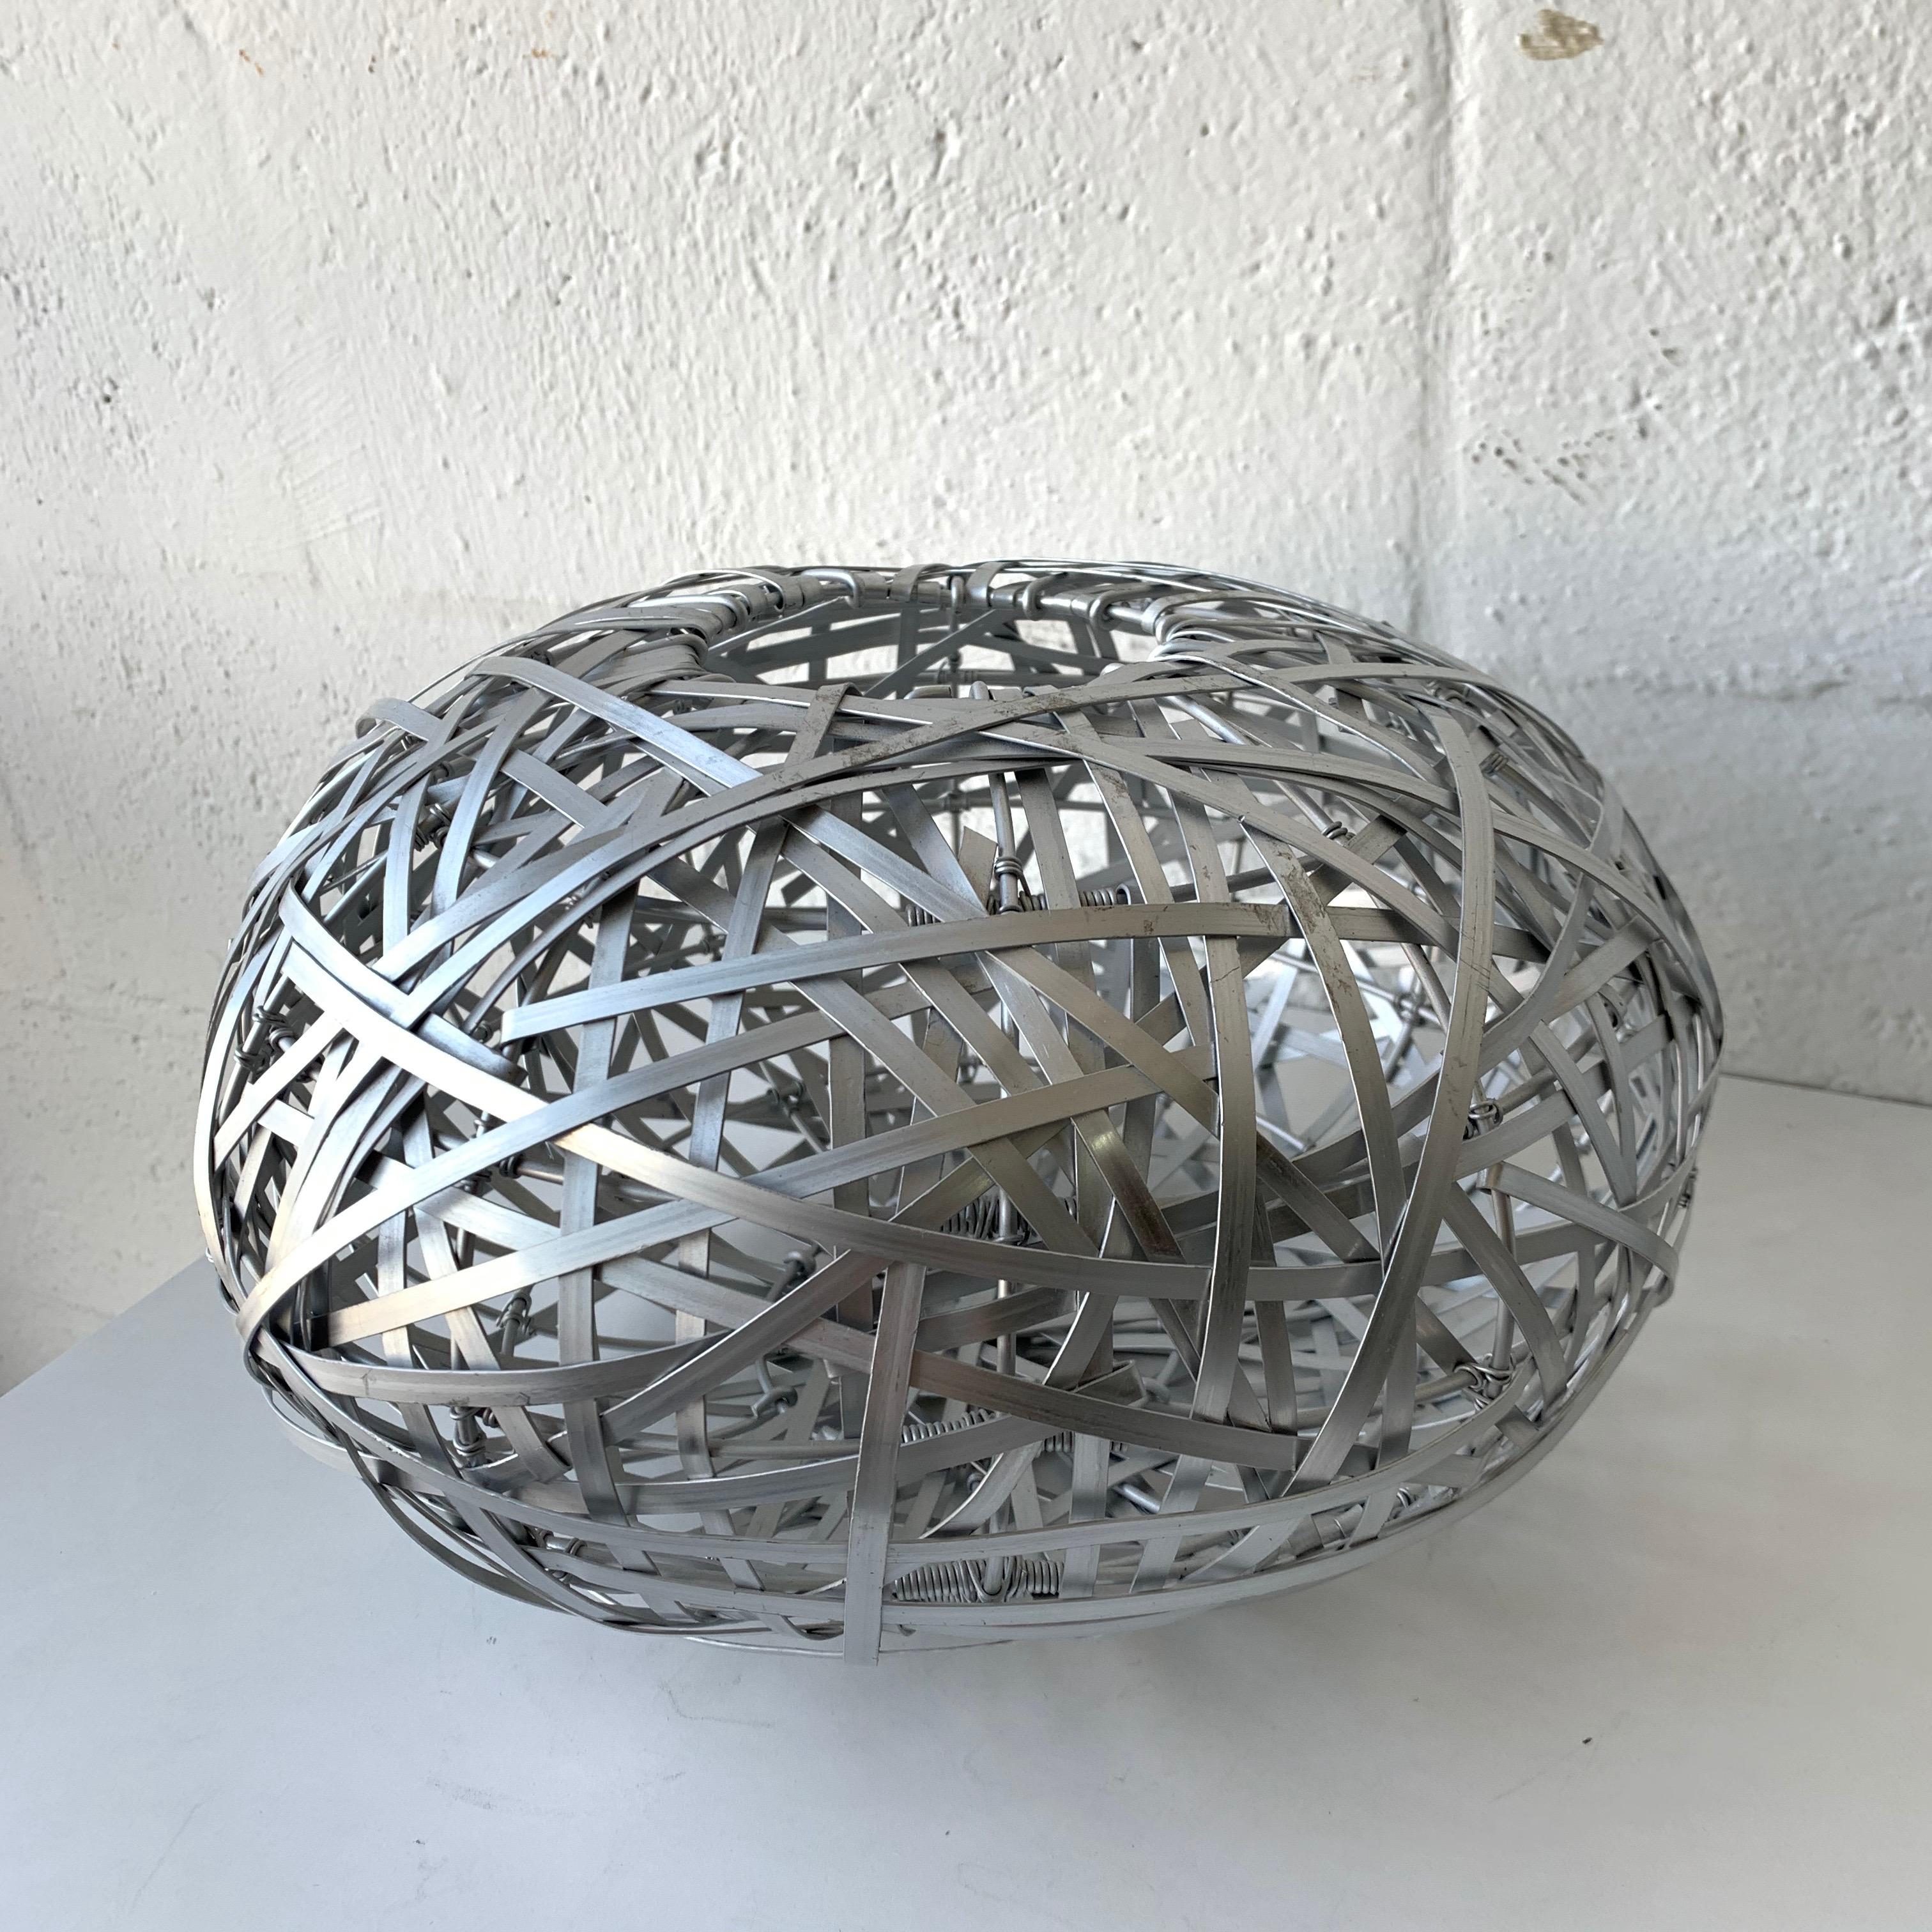 20th Century Brazilian Modern Sculptural Woven Aluminum Basket Attributed to Campana Brothers